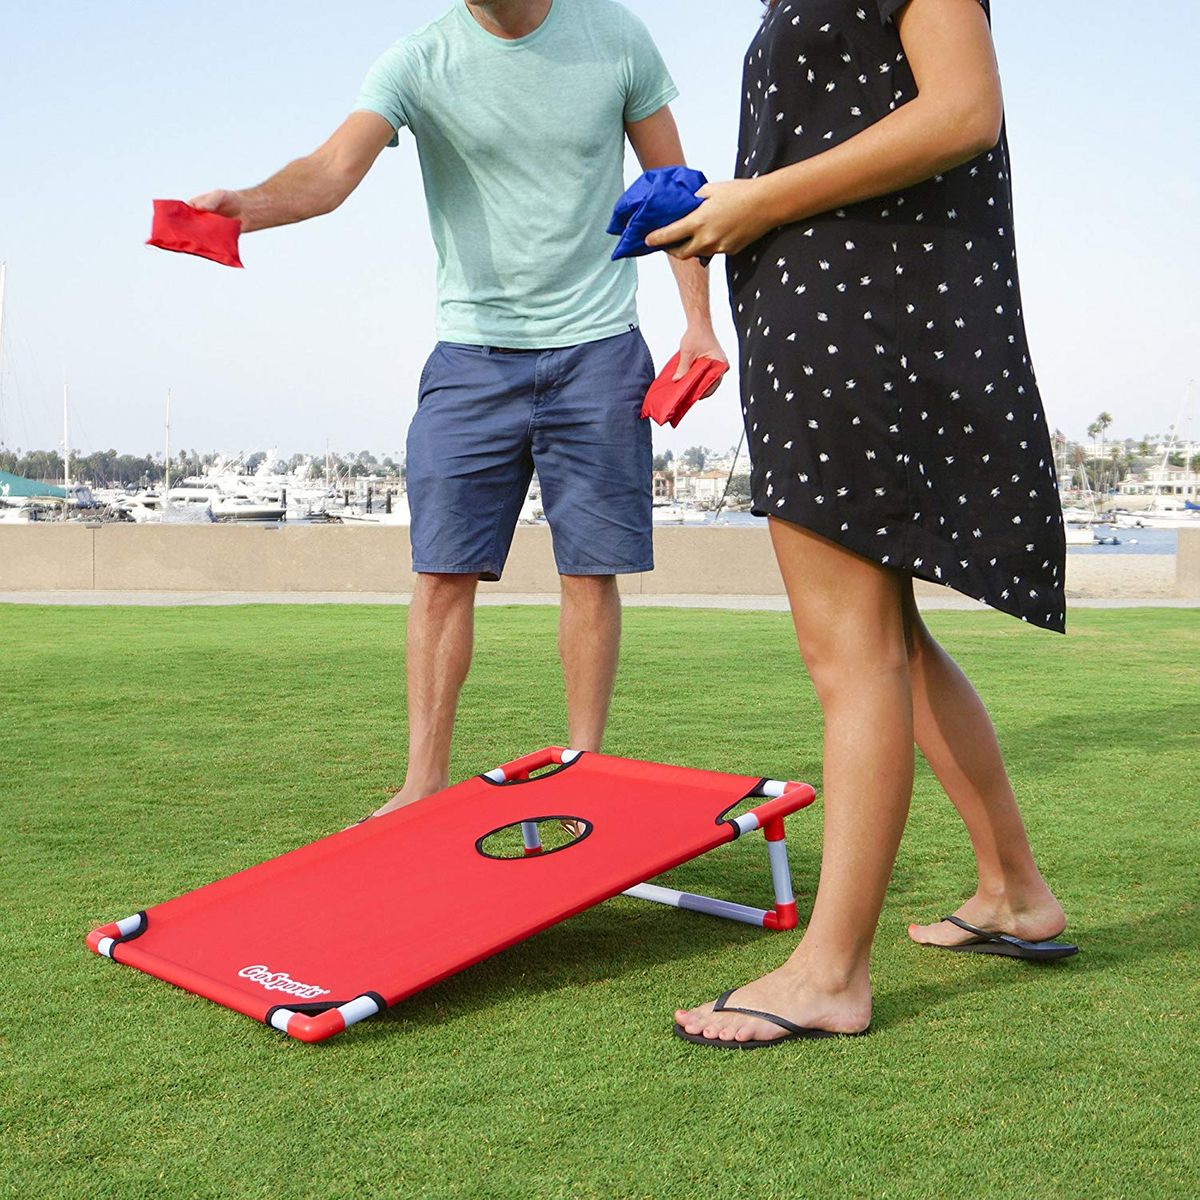 Outside Toys Backyard Games Cornhole Corn Hole Outdoor Family Games for Kids and Adults CUTE STONE Bean Bag Toss Game 